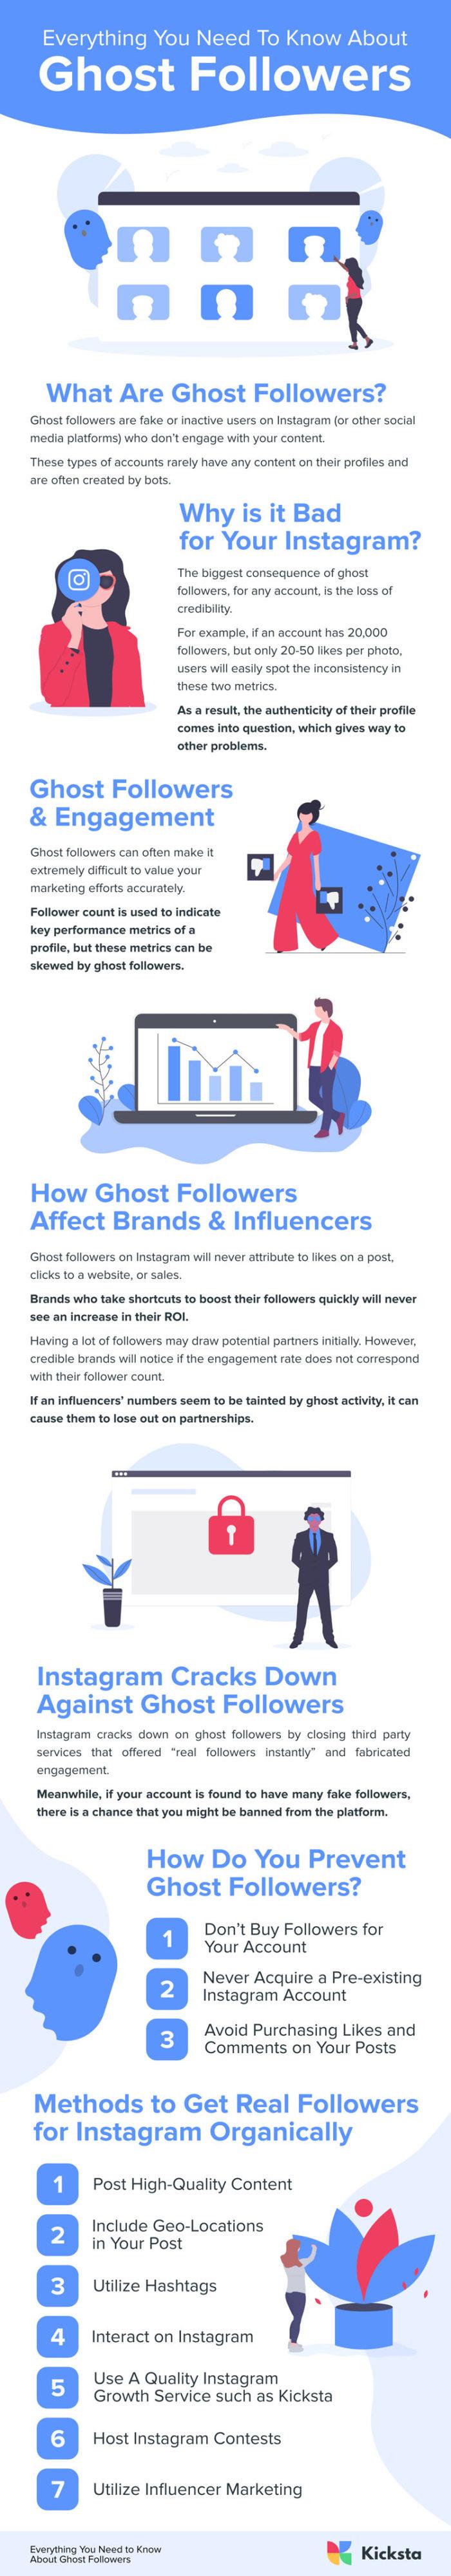 Everything You Need To Know About Ghost Followers